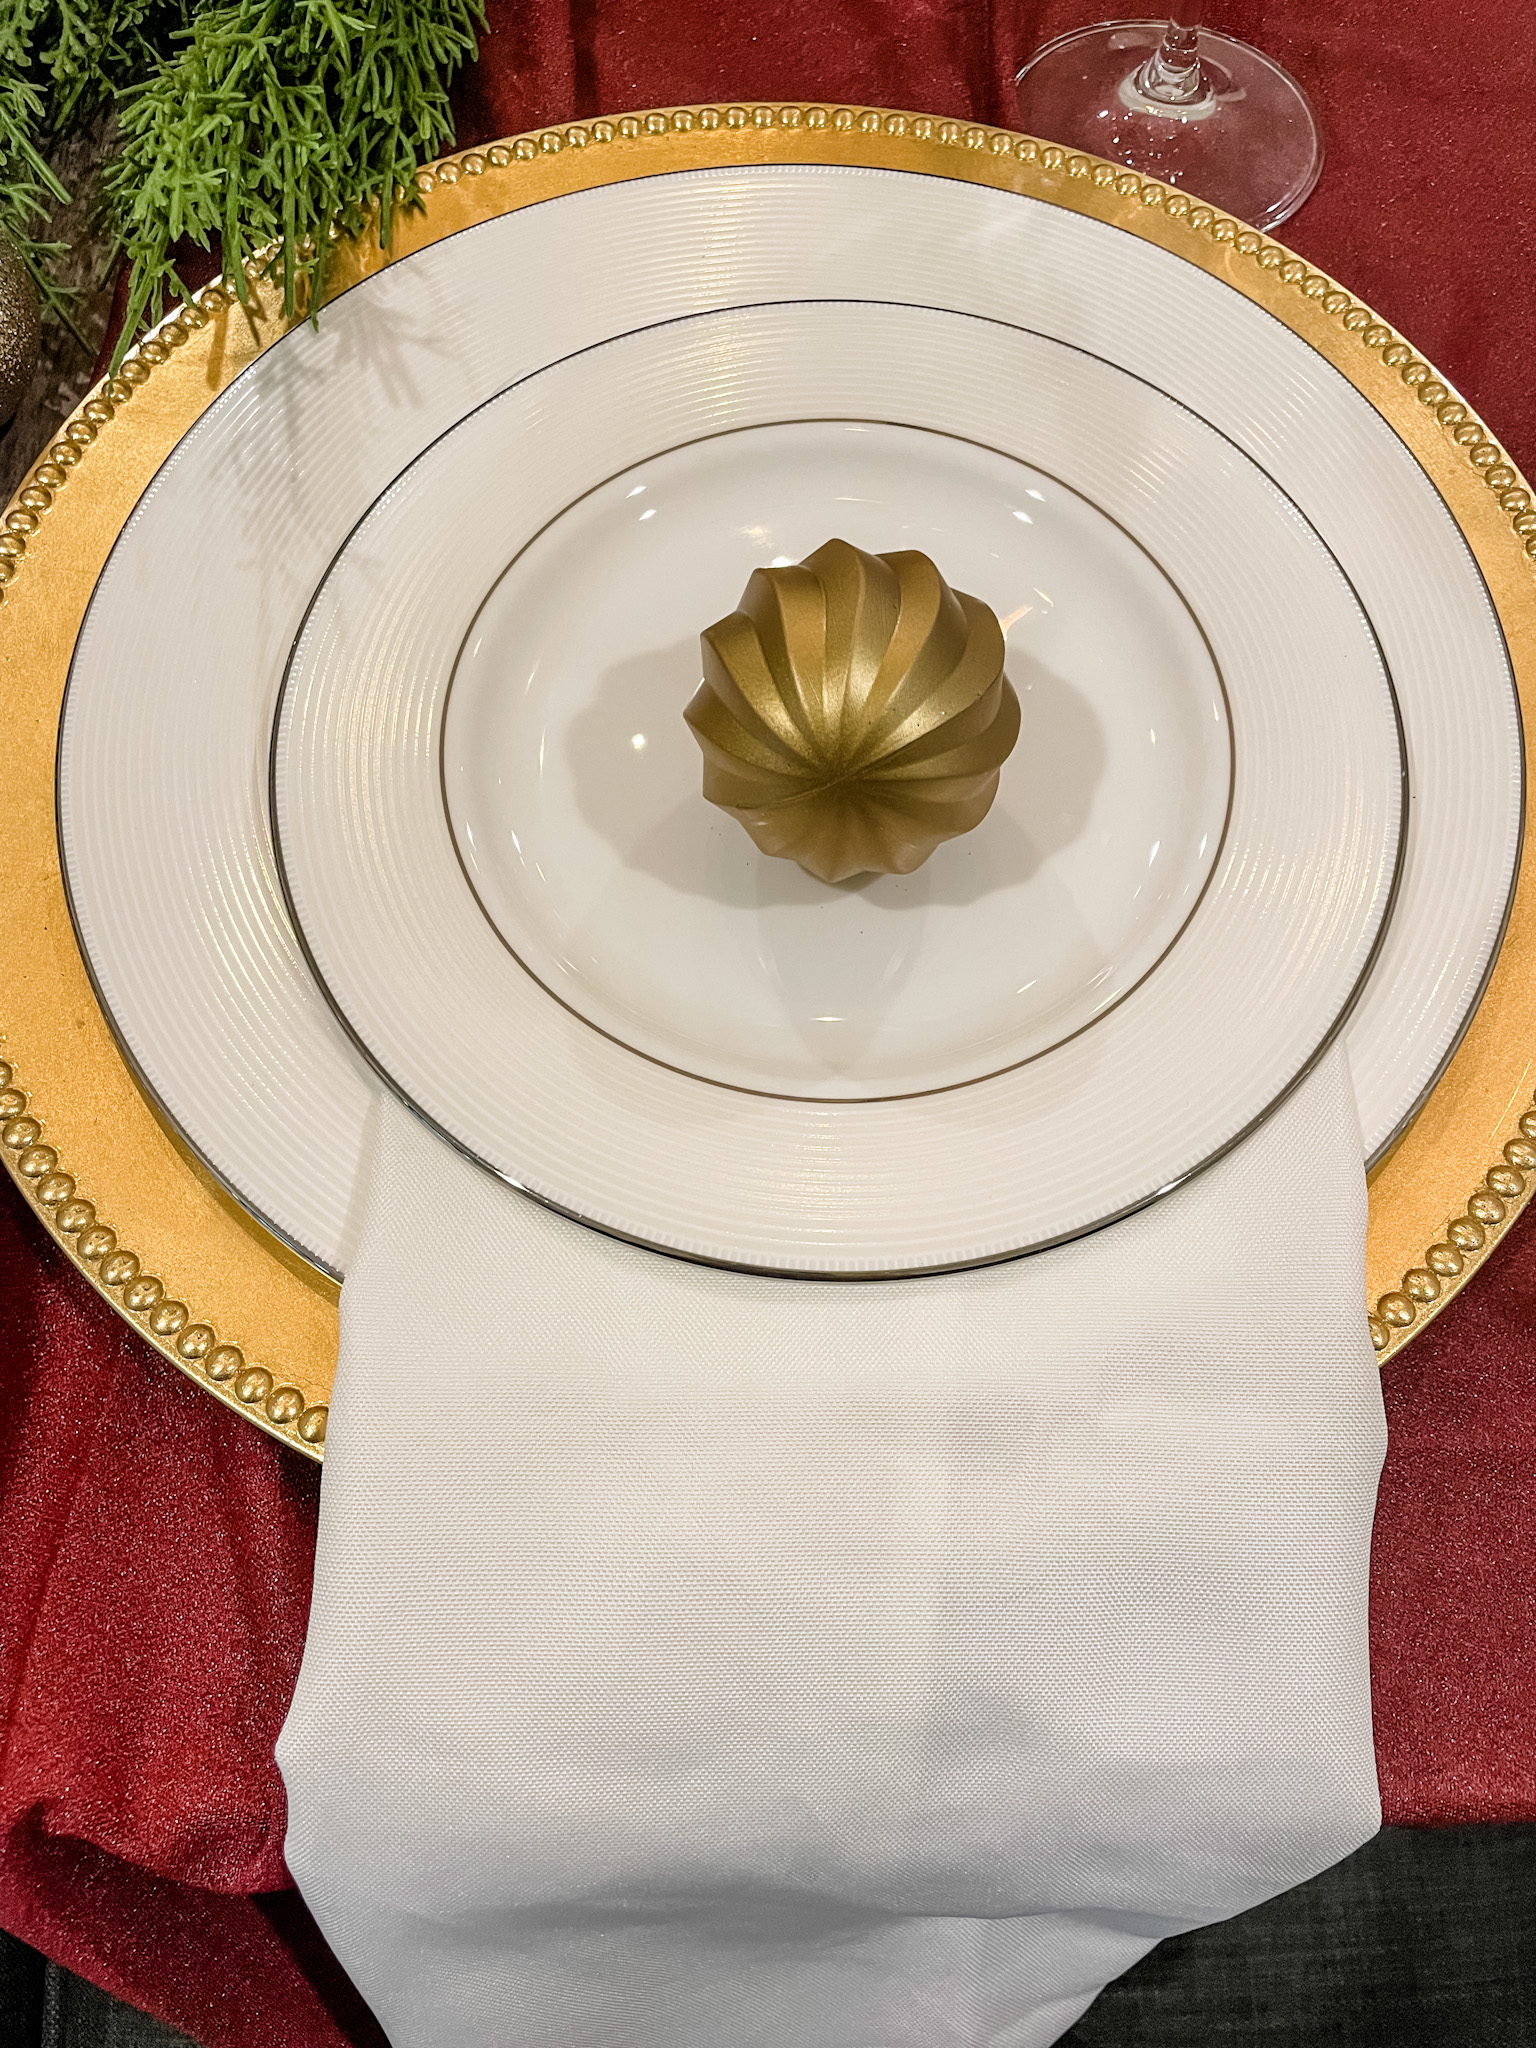 White china, with a gold charger, on a maroon table runner with a gold ornament on the plate. 